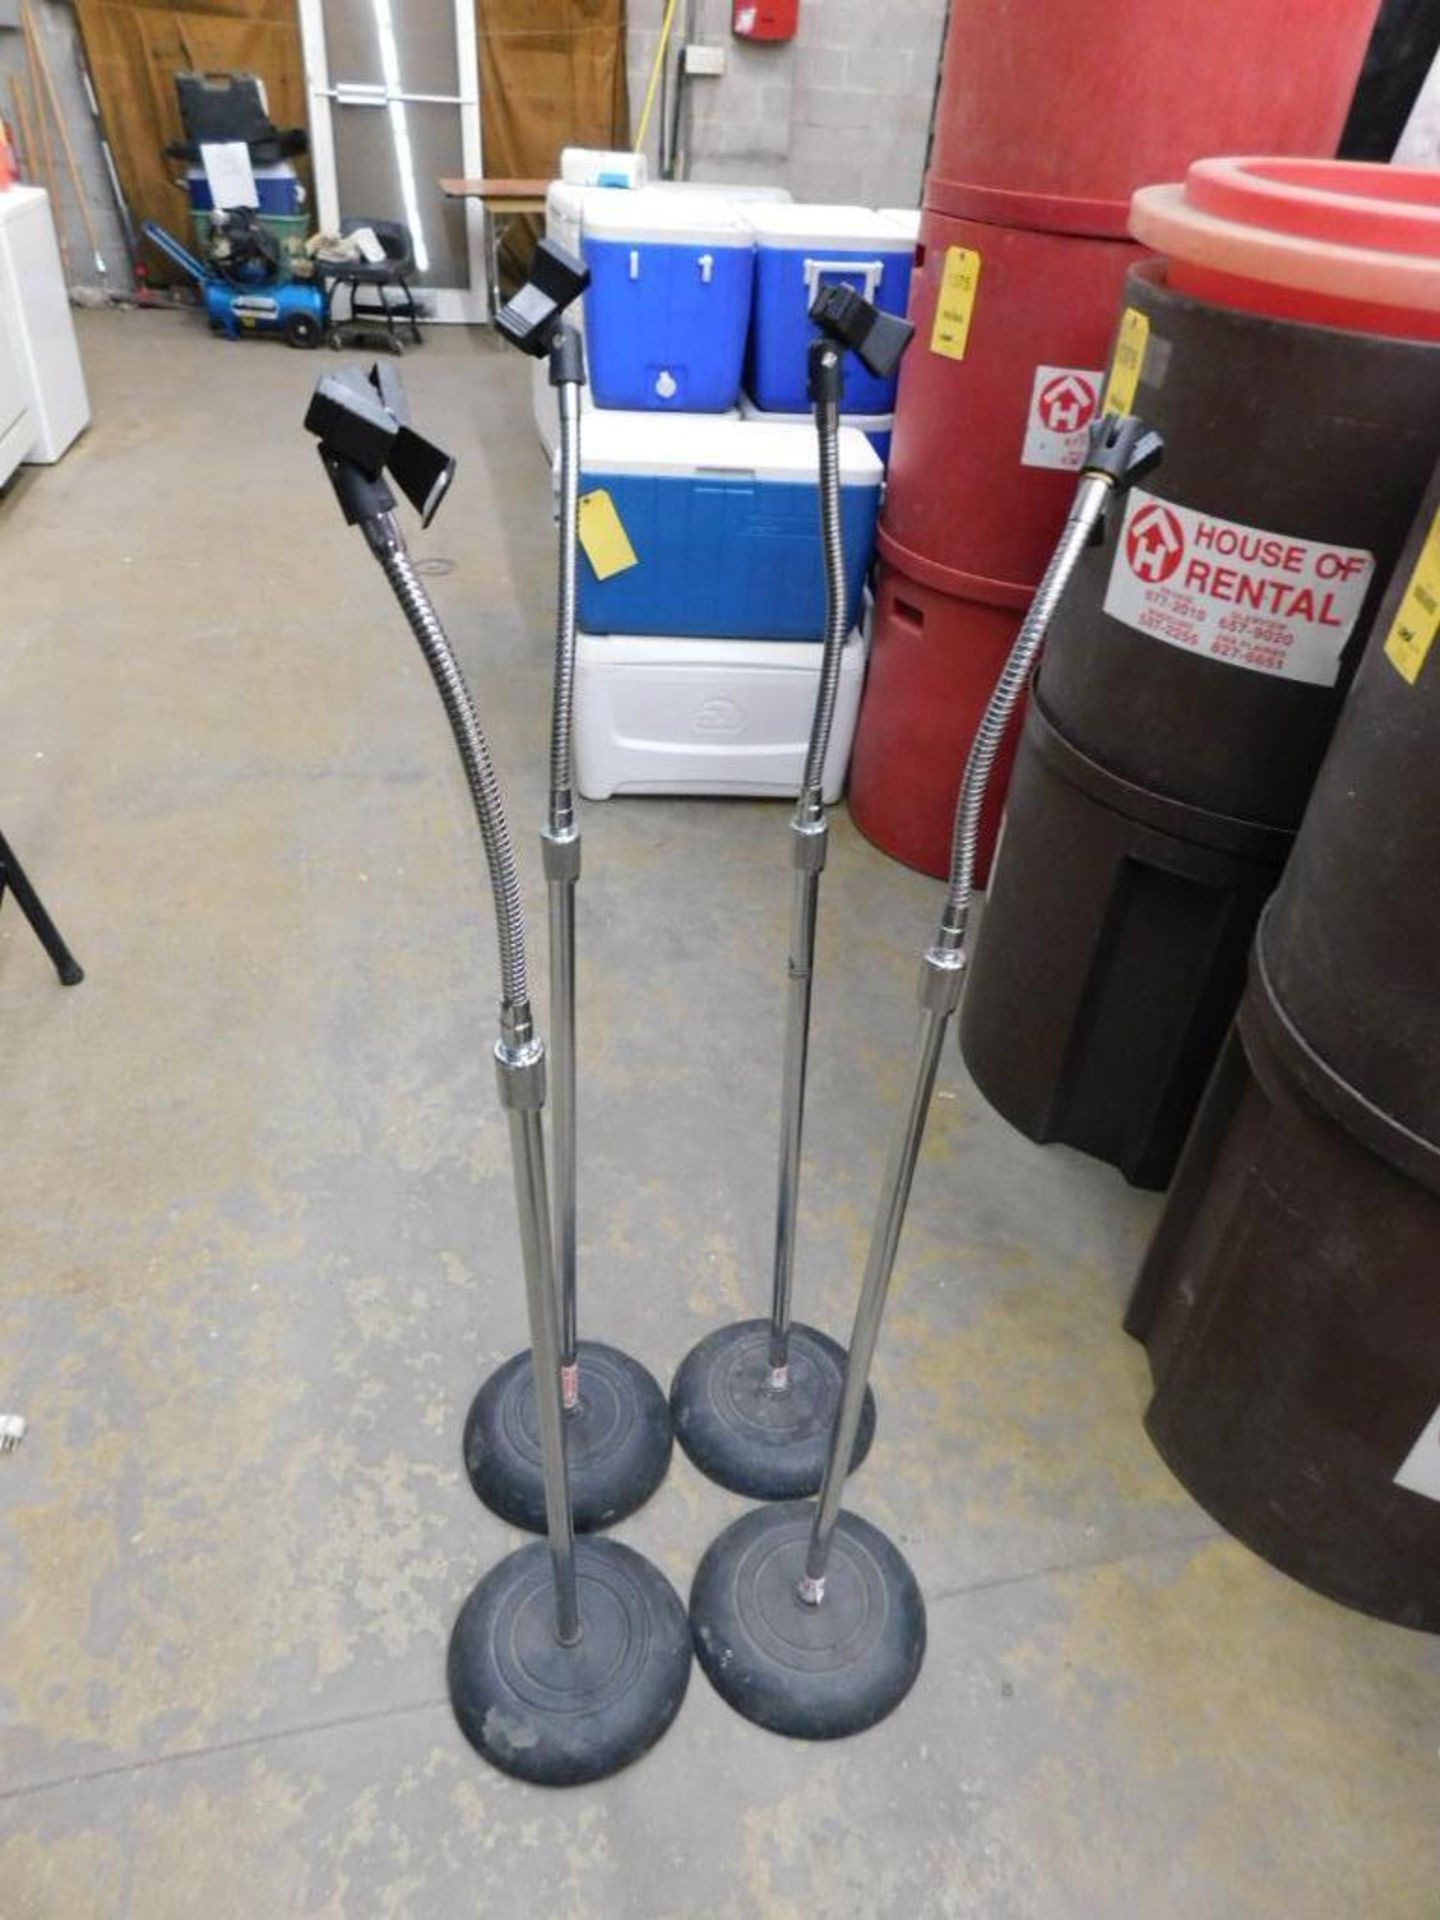 LOT: (4) Adjustable Microphone Stands (LOCATION: 1766 Waukegan Rd., Glenview, IL 60025)